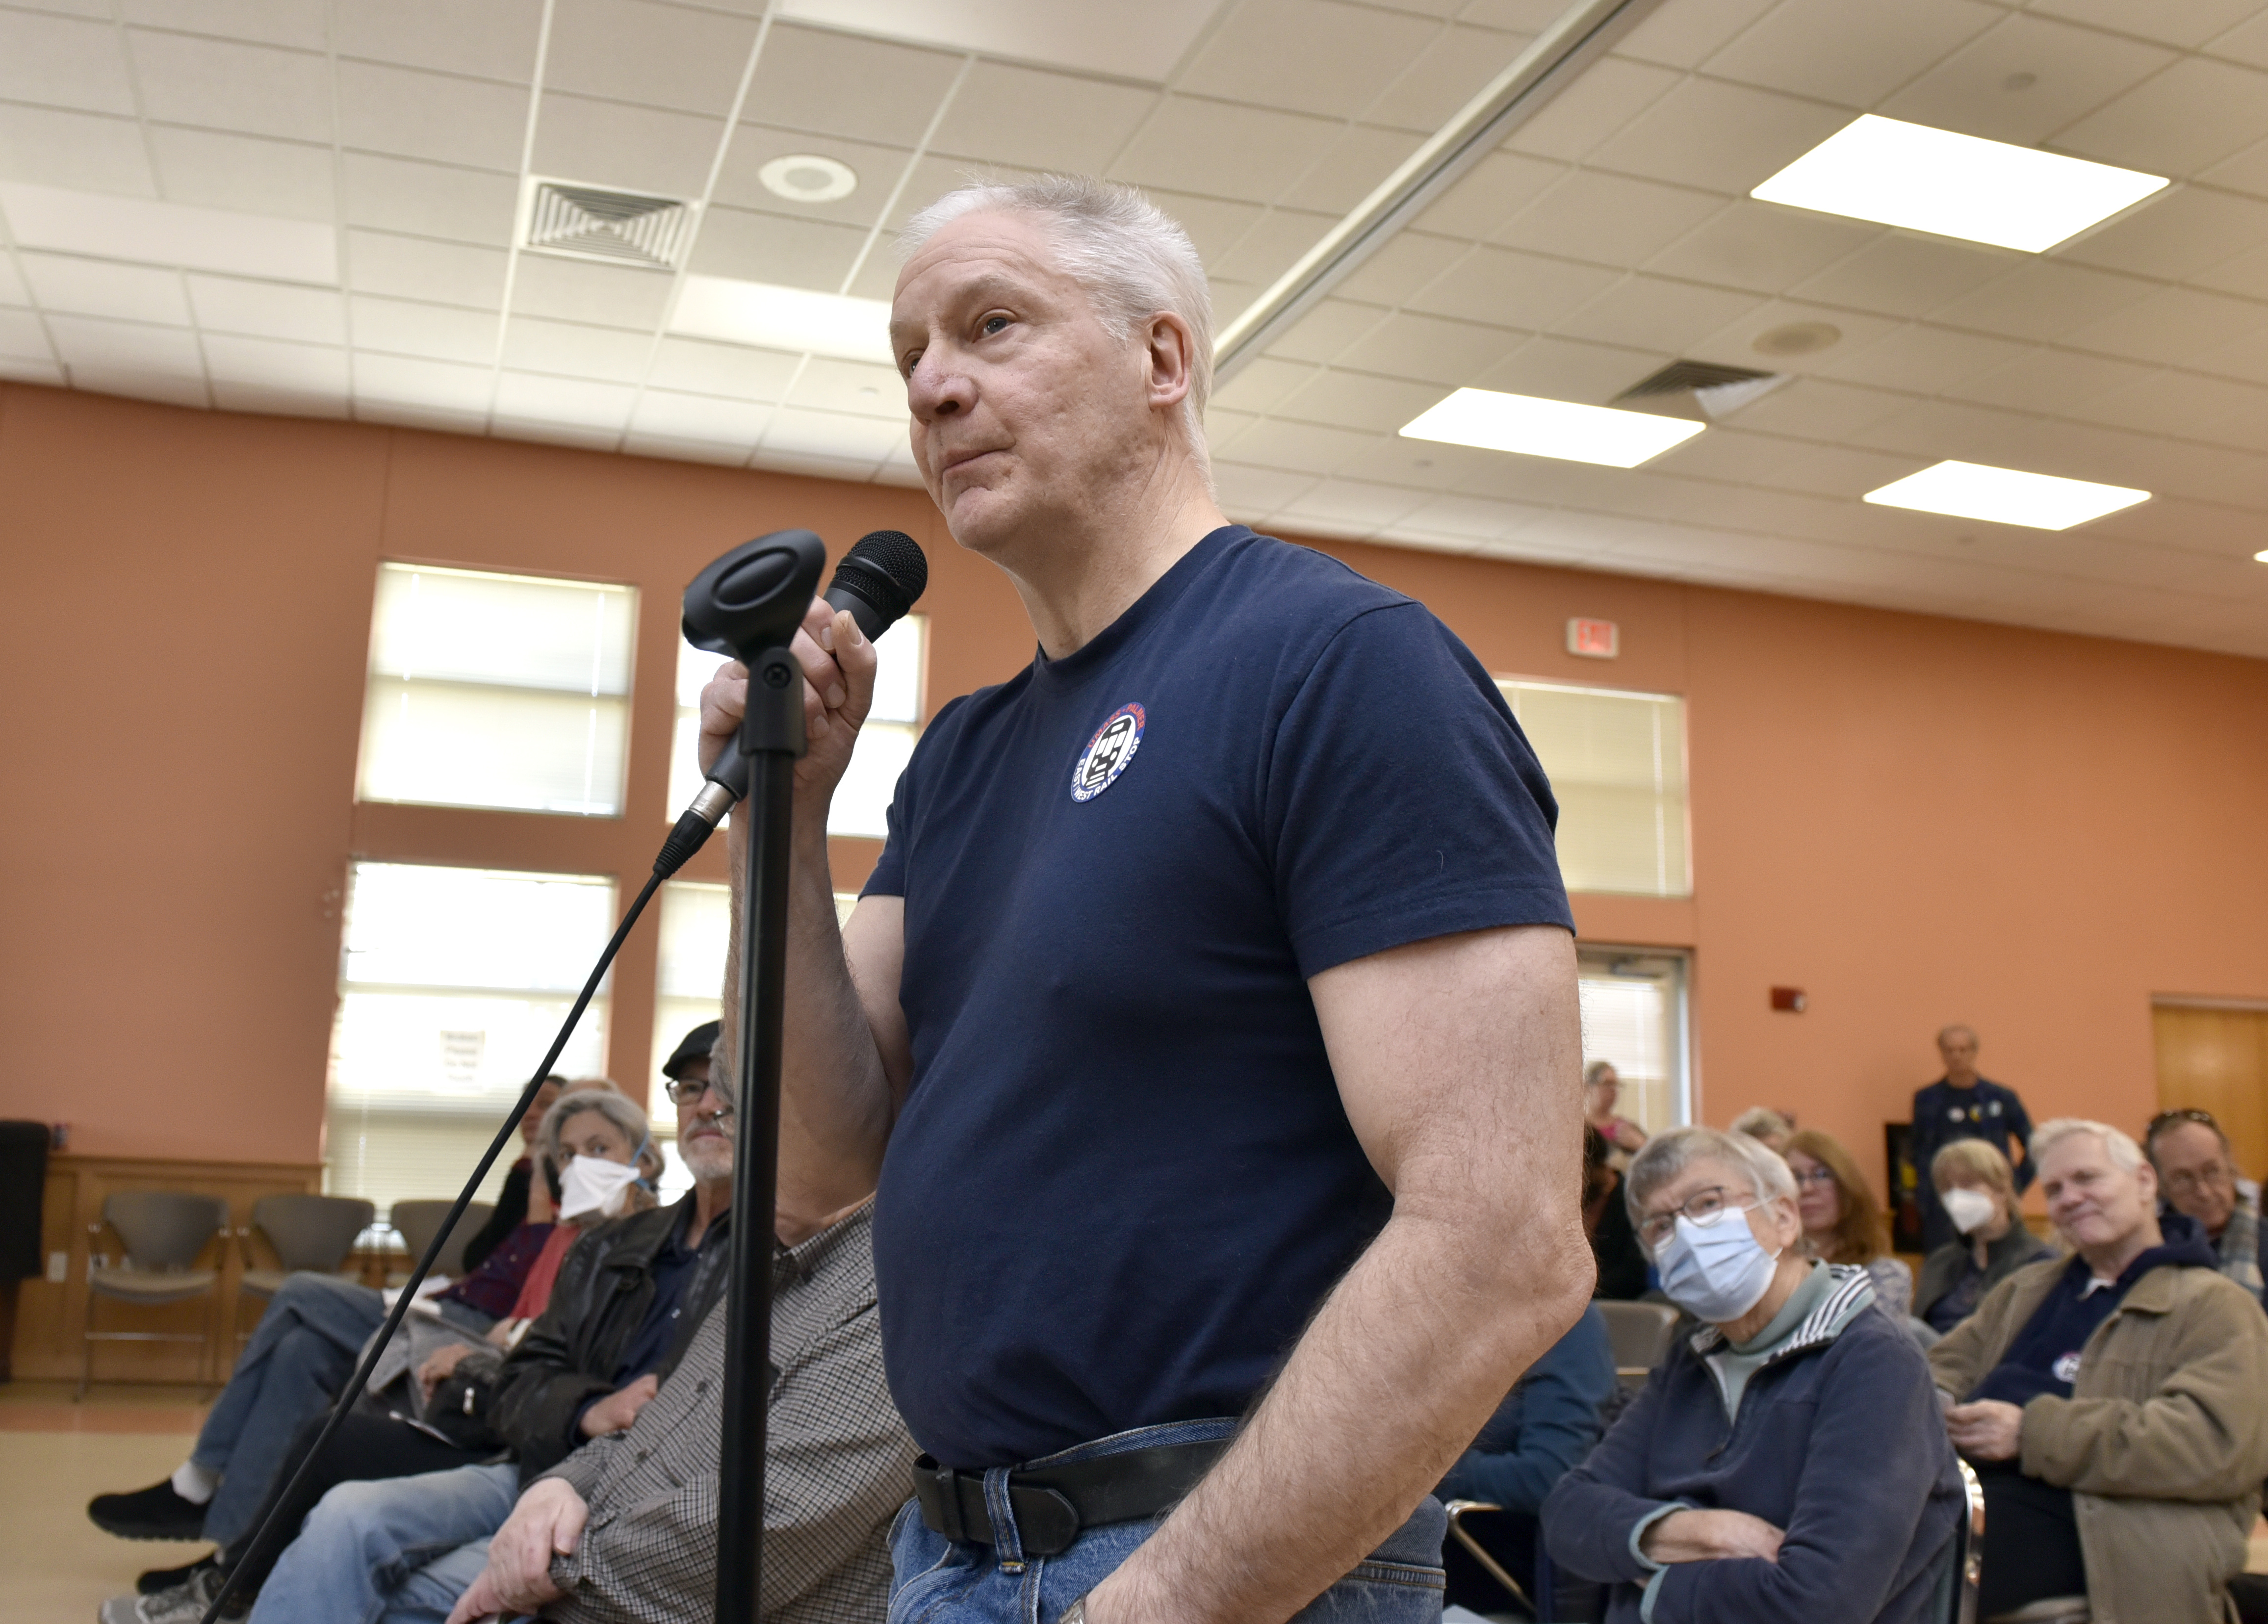 Ken Dolan-DelVecchio of Palmer, representing Citizens for a Palmer Rail Stop", speaks during a meeting of the Western Massachusetts Passenger Rail Commission at the Northampton Senior Center.  (Don Treeger / The Republican)  3/21/2023  